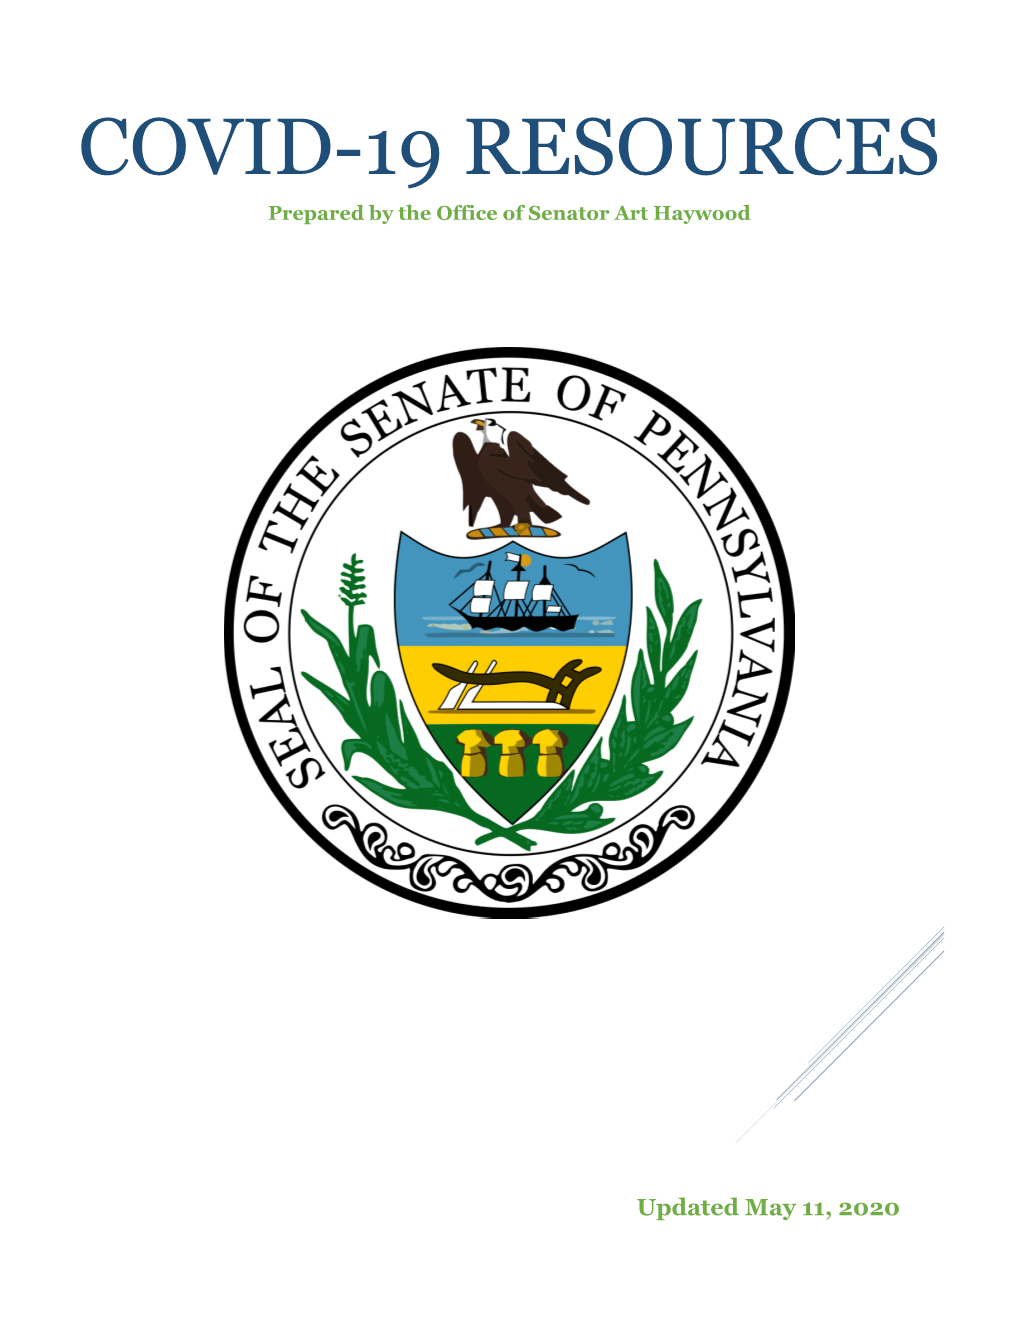 COVID-19 RESOURCES Prepared by the Office of Senator Art Haywood